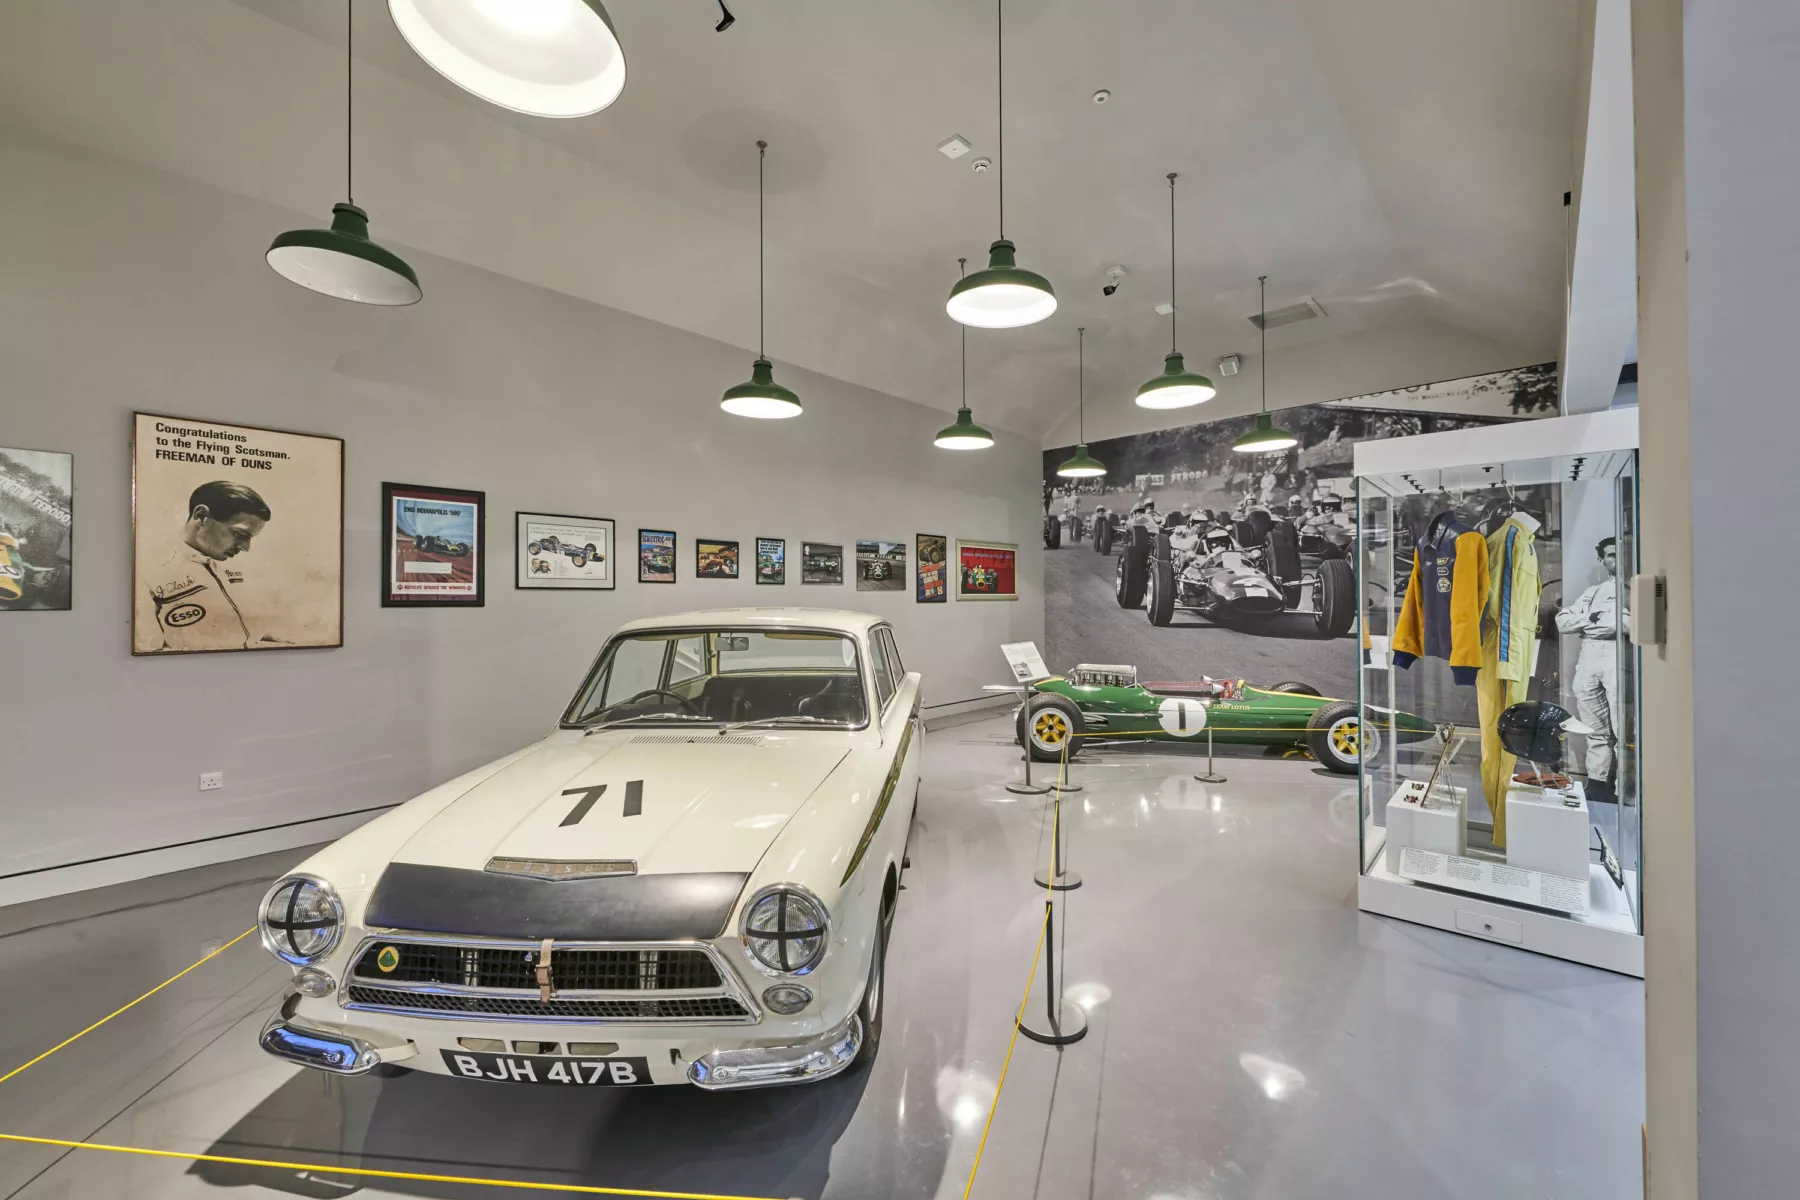 Inside the garages at the Jim Clark Motorsport Museum with vintage racing cars driven by Jim Clark: A Lotus Cortina and a Lotus 25 R6